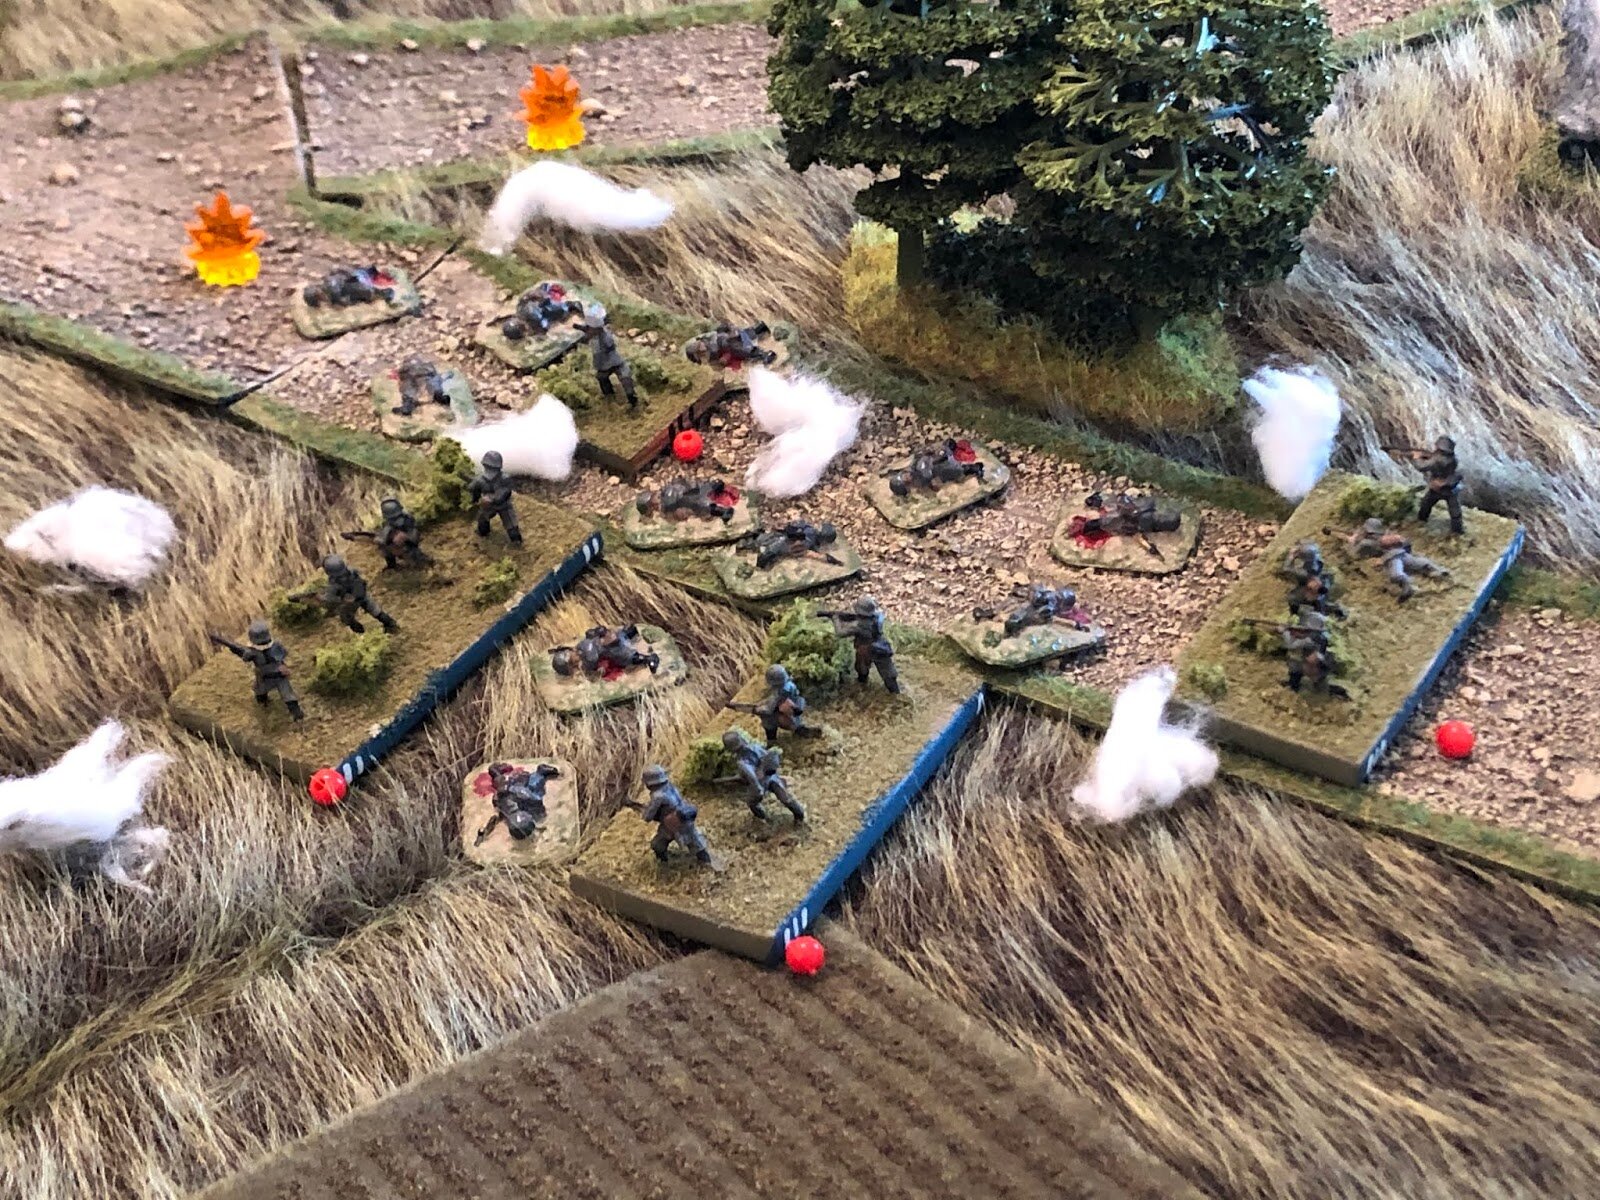 And Soviet mortars continue to thrash the German 1st Company, suppressing them again.